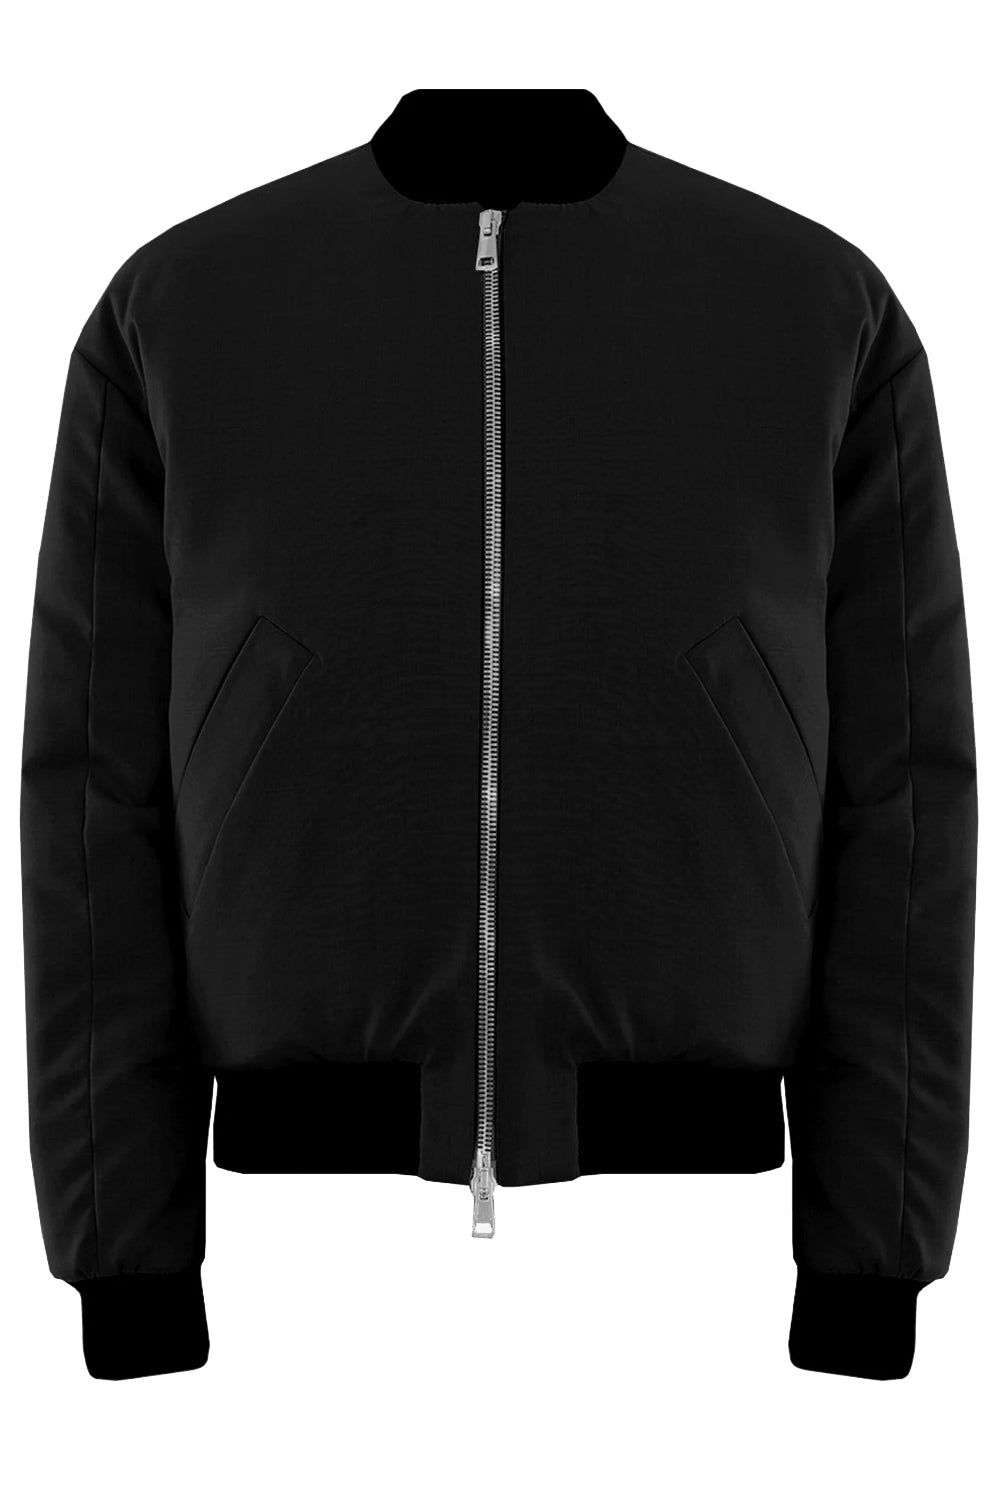 LOW BRAND Giubbotto bomber military tropical